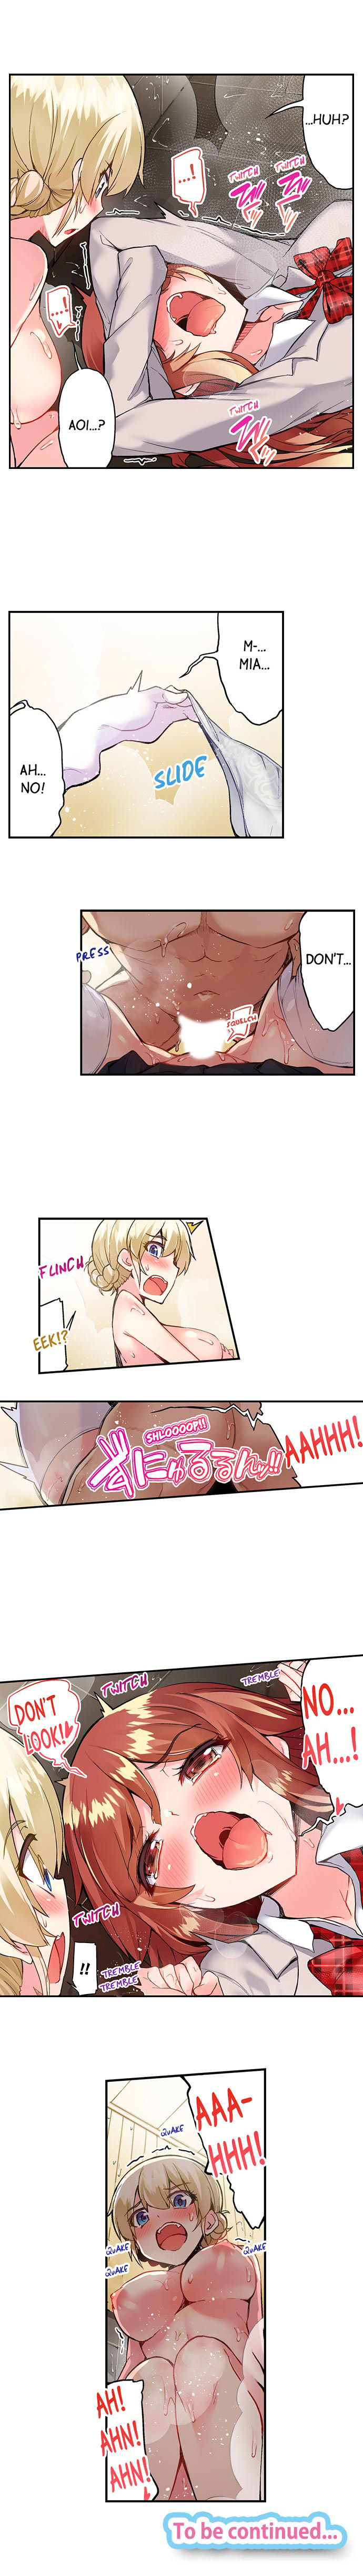 Traditional Job of Washing Girls’ Body - Chapter 81 Page 9